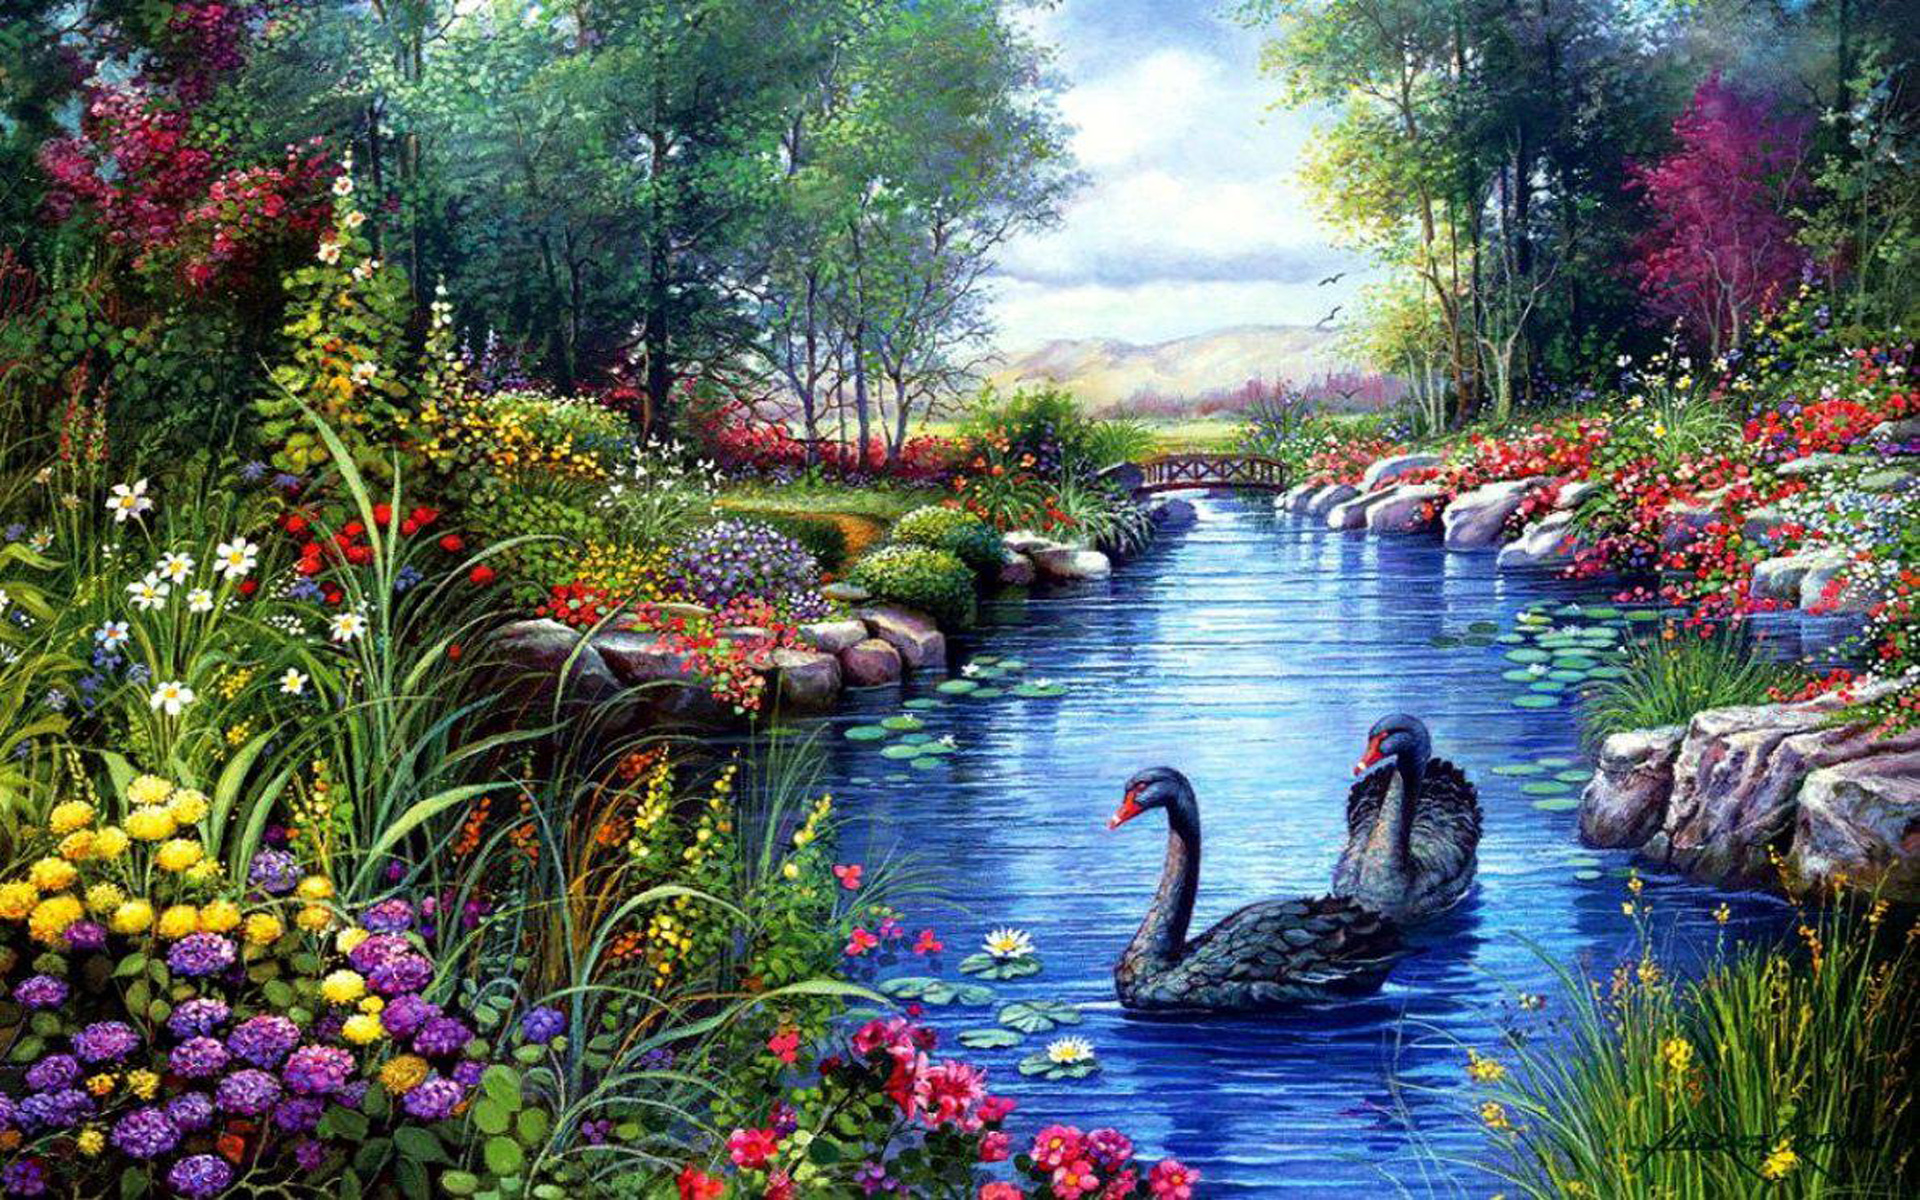 Black Swans Trees River Flowers Painting Hd Wallpaper : Wallpapers13.com